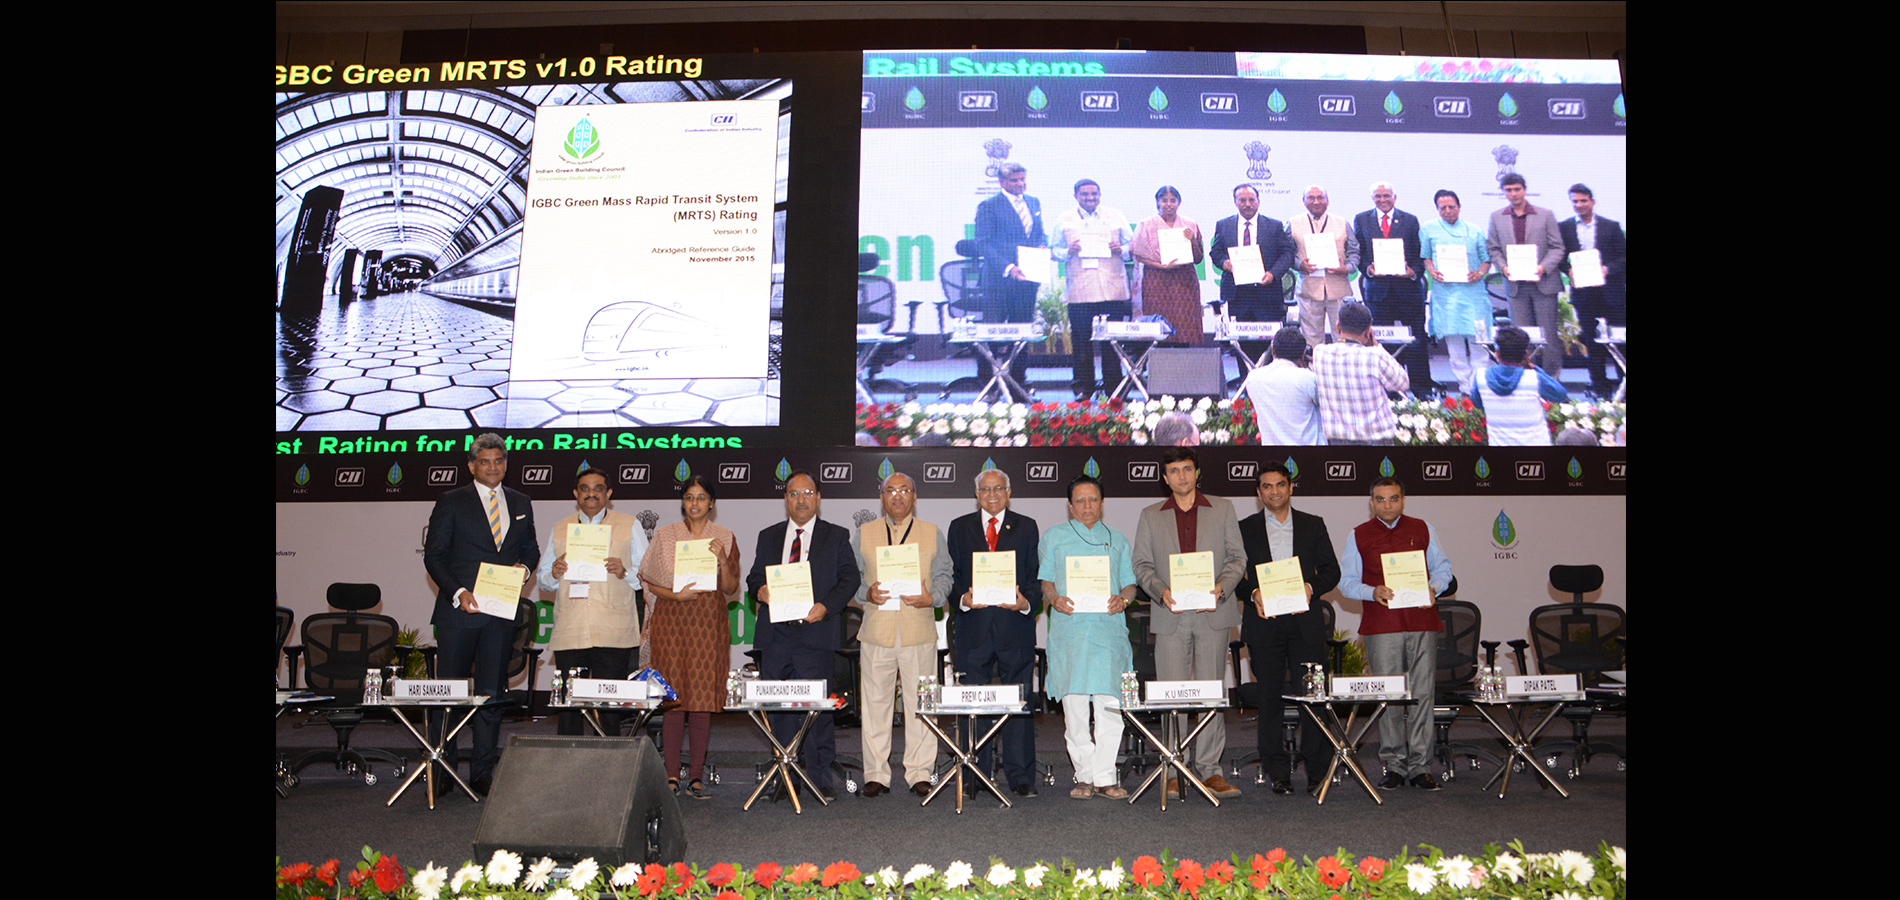 IGBC Green Cities Rating – Pilot Version launched